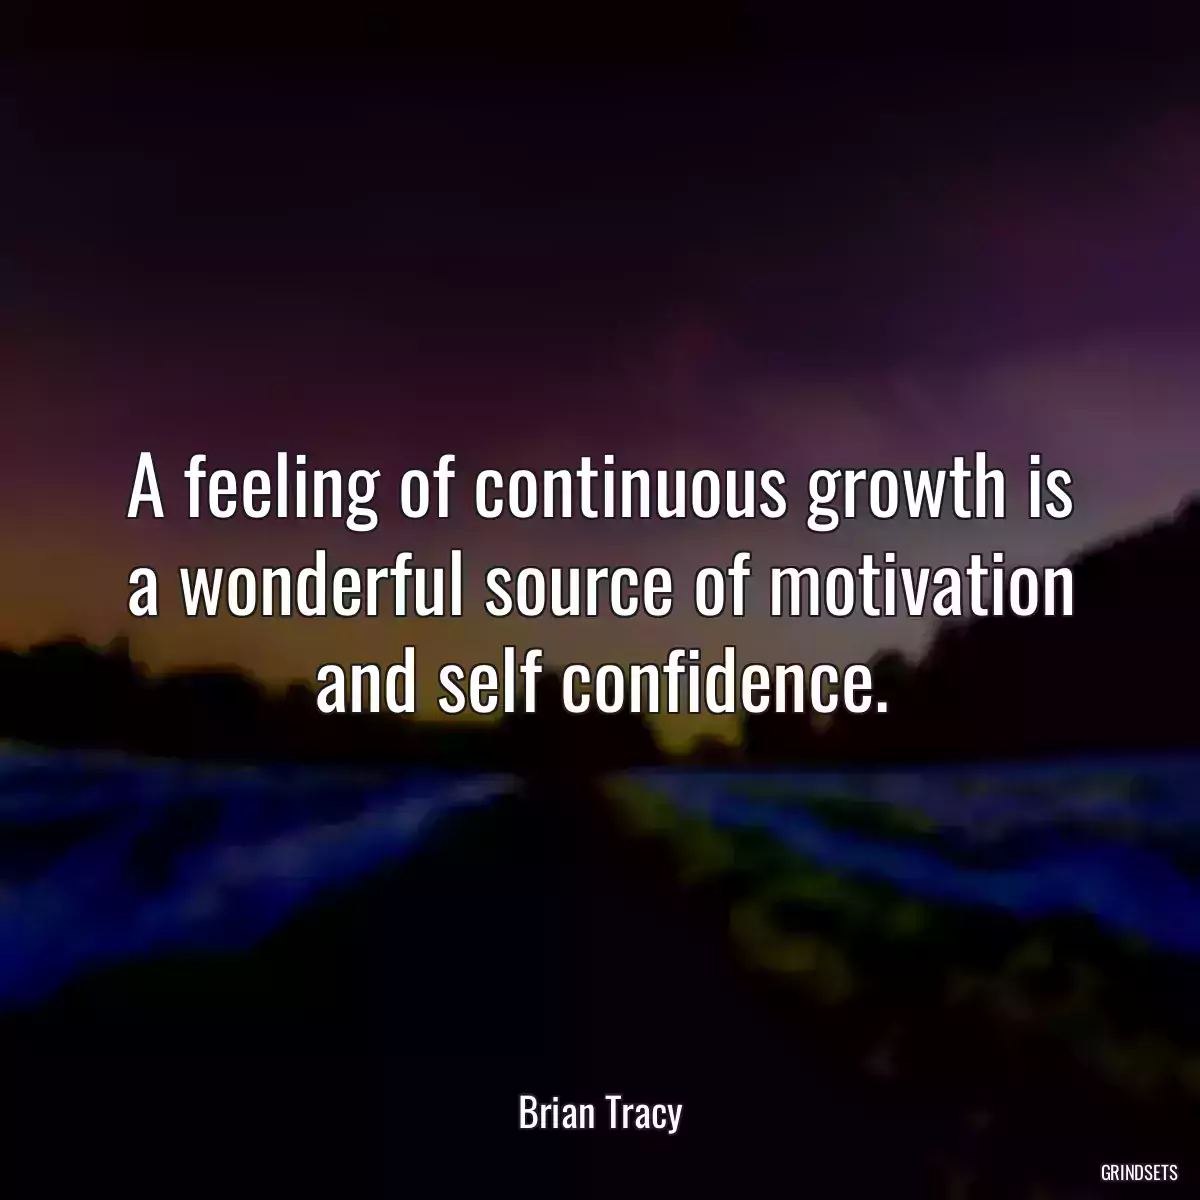 A feeling of continuous growth is a wonderful source of motivation and self confidence.